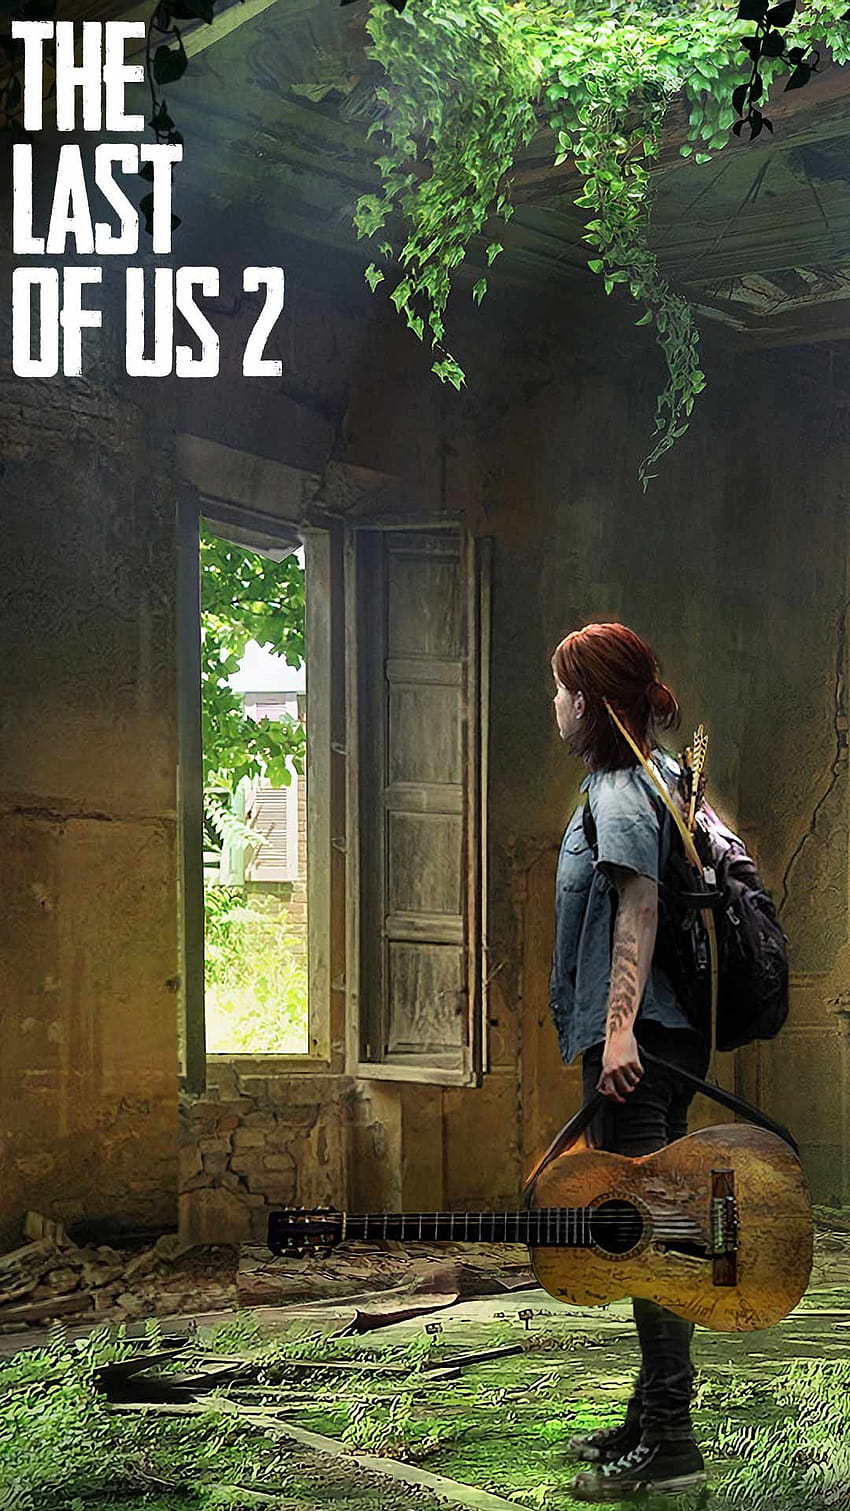 The last of us part 2 phone backgrounds PS4 game art Poster on iPhone  android, ellie the last of us 2 HD phone wallpaper | Pxfuel